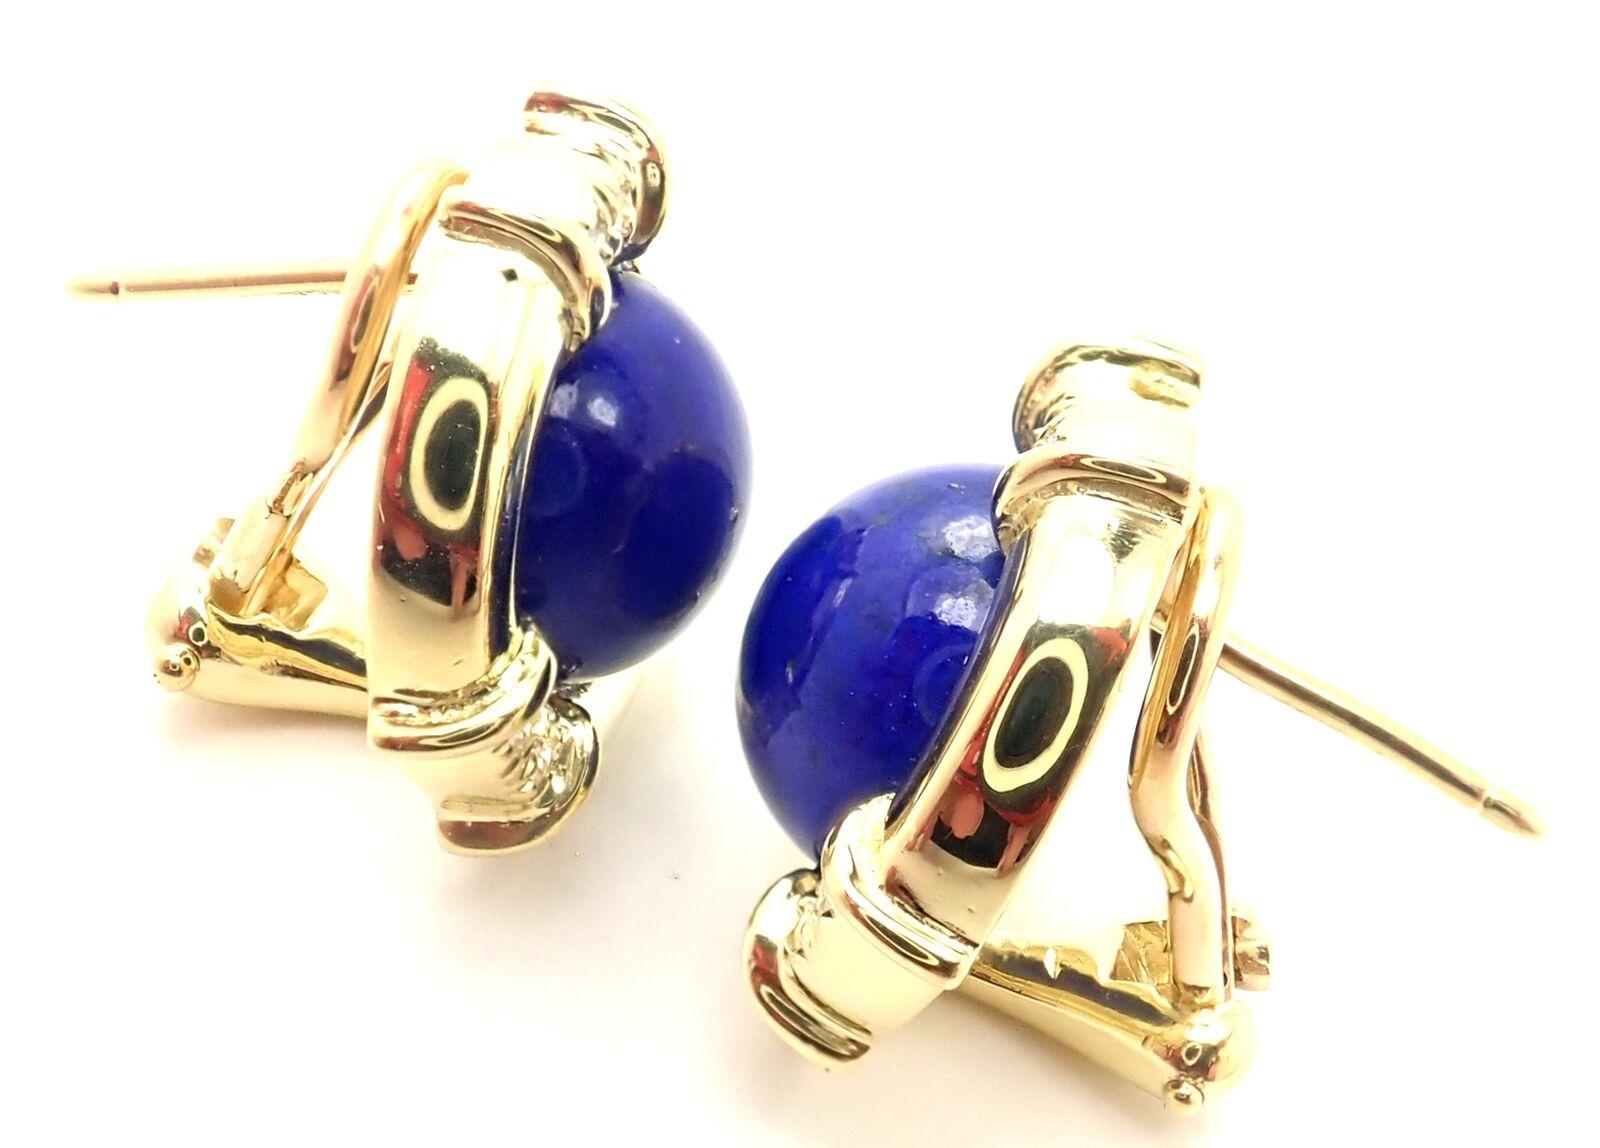 18k Yellow Gold Diamond Lapis Lazuli Earrings by Tiffany & Co. 
With 12 round brilliant cut diamonds VS1 clarity, G color total weight approximately .20ct
2 lapis stones 10mm each
These earrings are made for pierced ears.
Details: 
Weight: 12.6